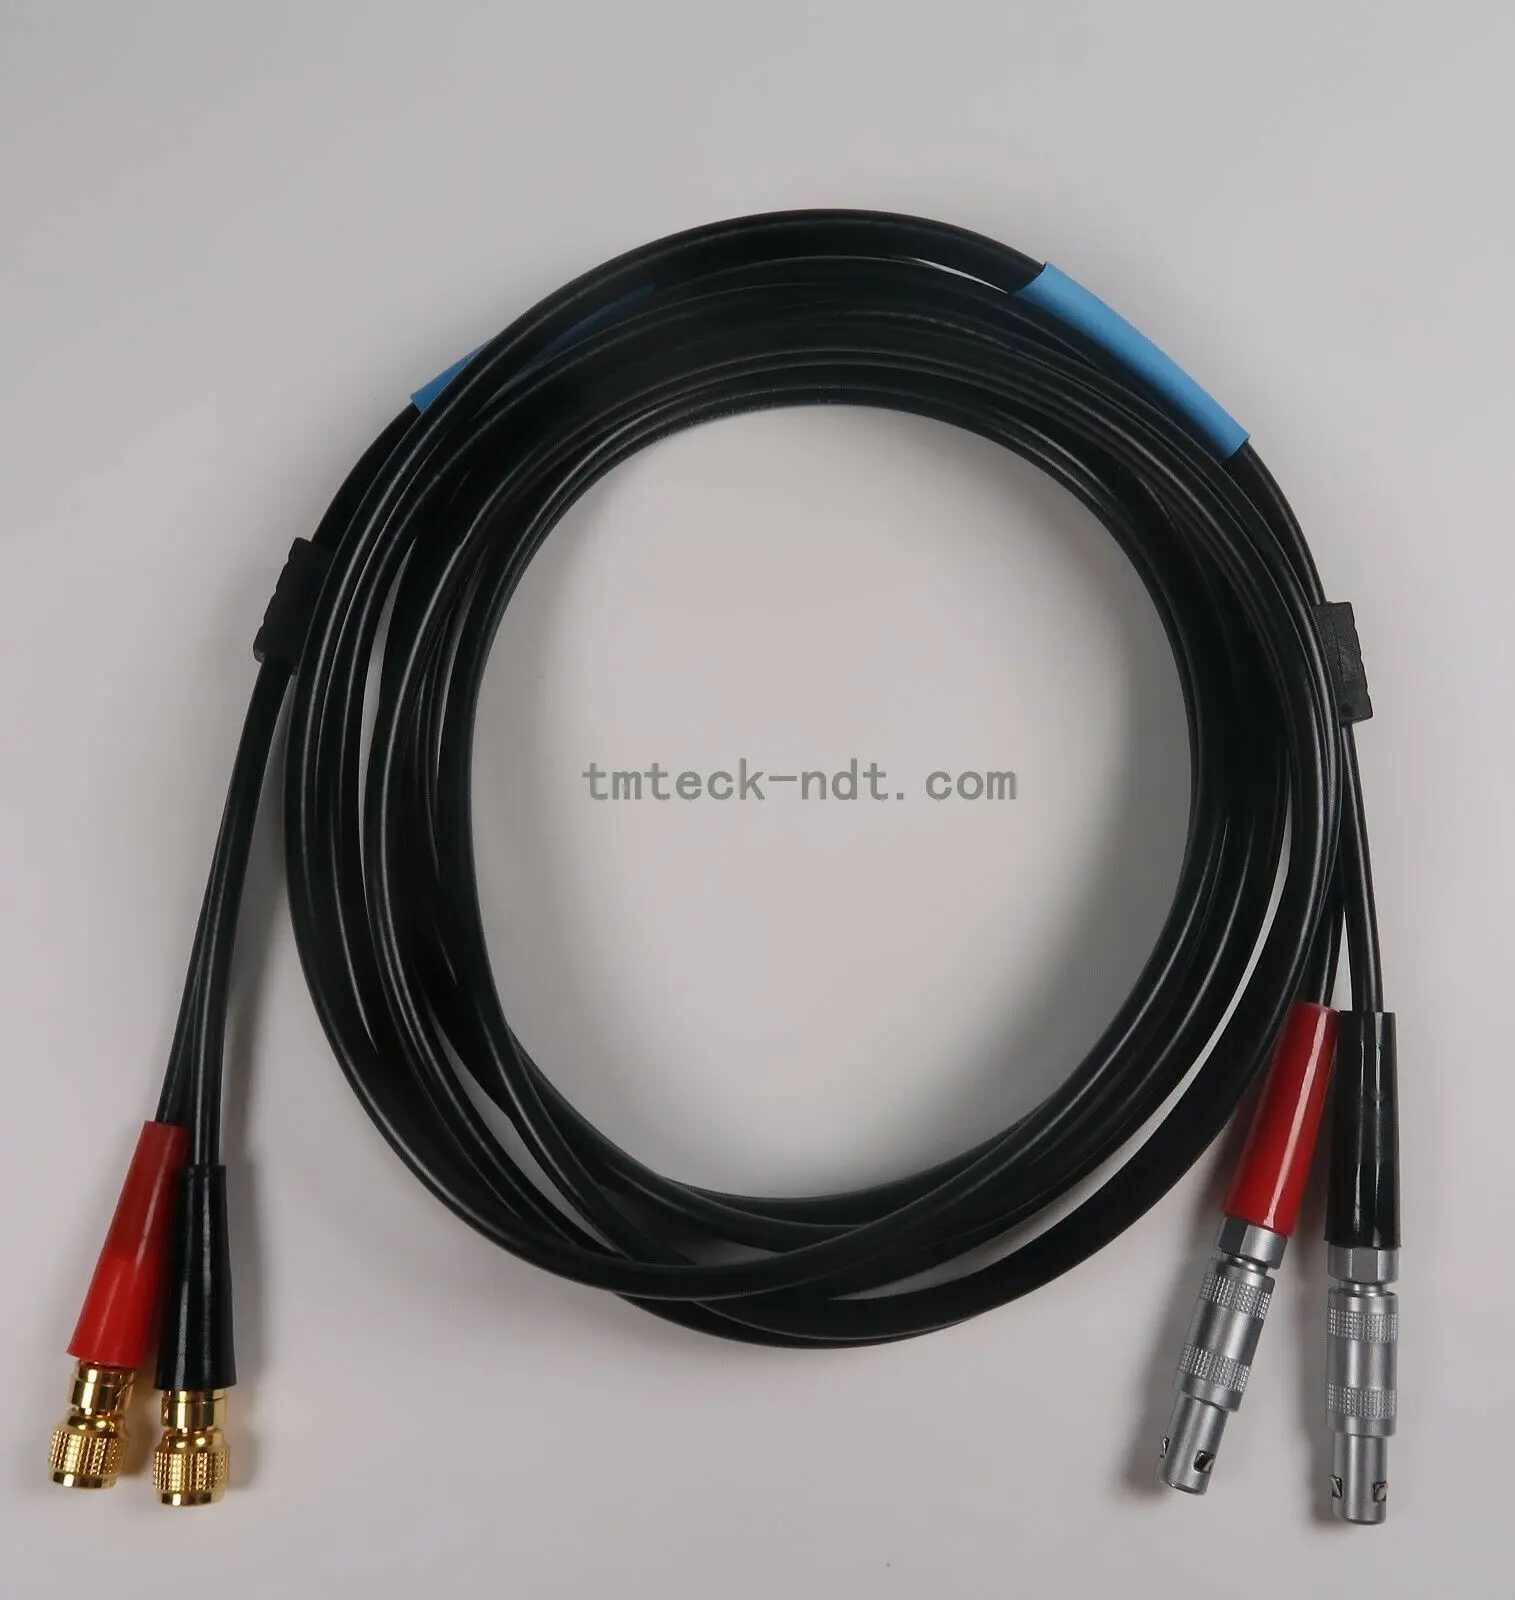 compatible with style Lemo00 to Microdot Dual Industrial coaxial cables RG174 ultrasonic cable for flaw detector